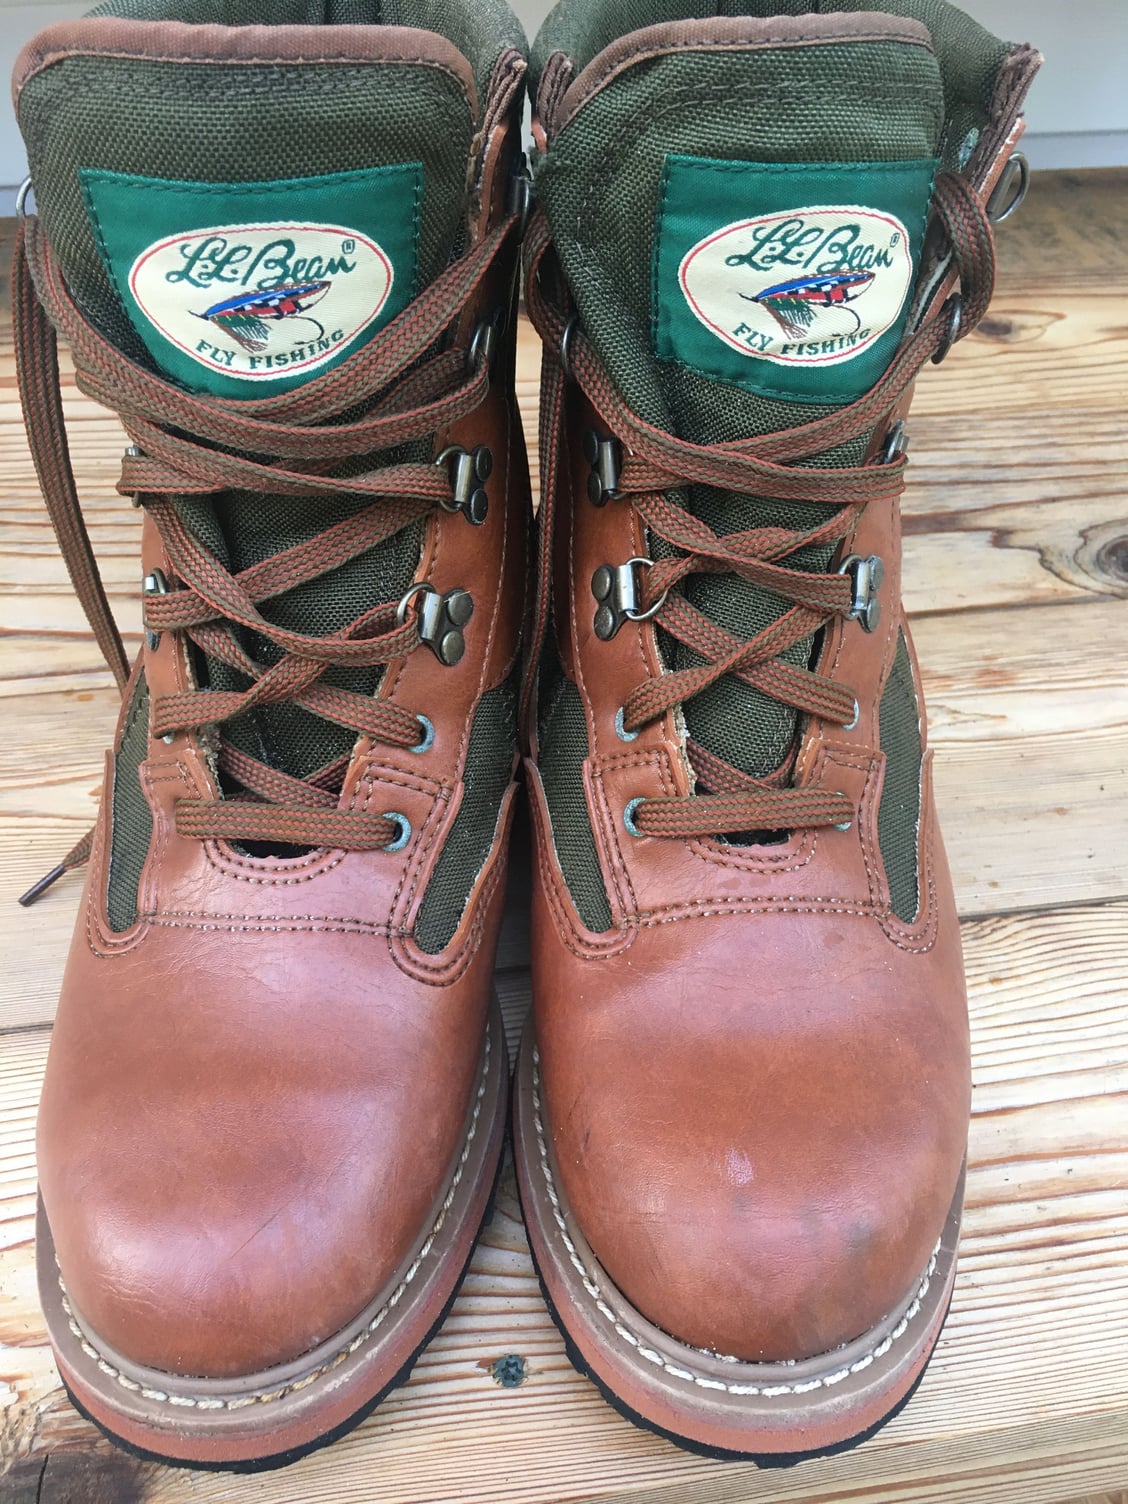 The Hull Truth - Boating and Fishing Forum - FS- LL Bean Wading Boots